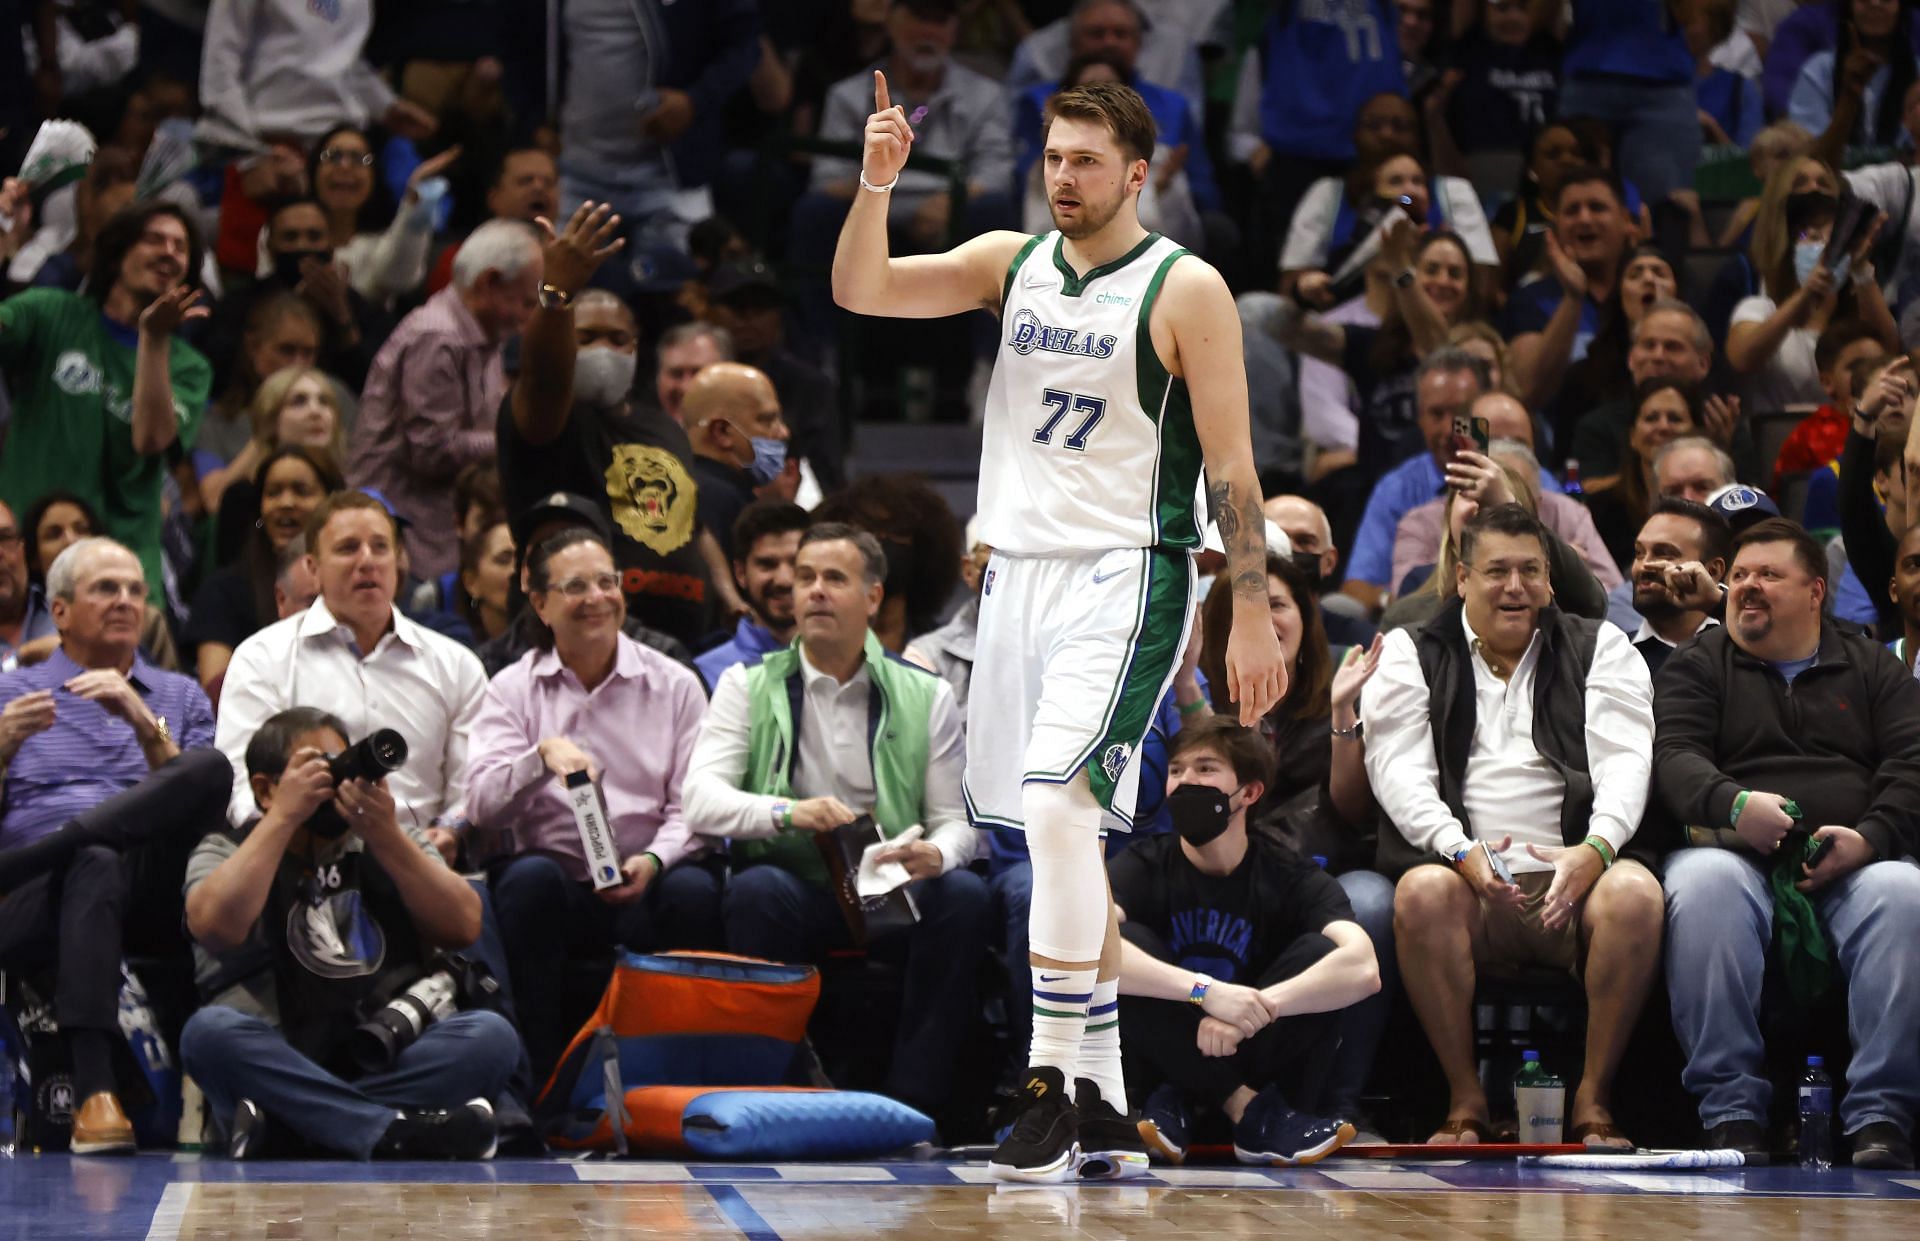 Luka Doncic #77 of the Dallas Mavericks reacts after scoring a basket against the Golden State Warriors in the first half at American Airlines Center on March 3, 2022 in Dallas, Texas.